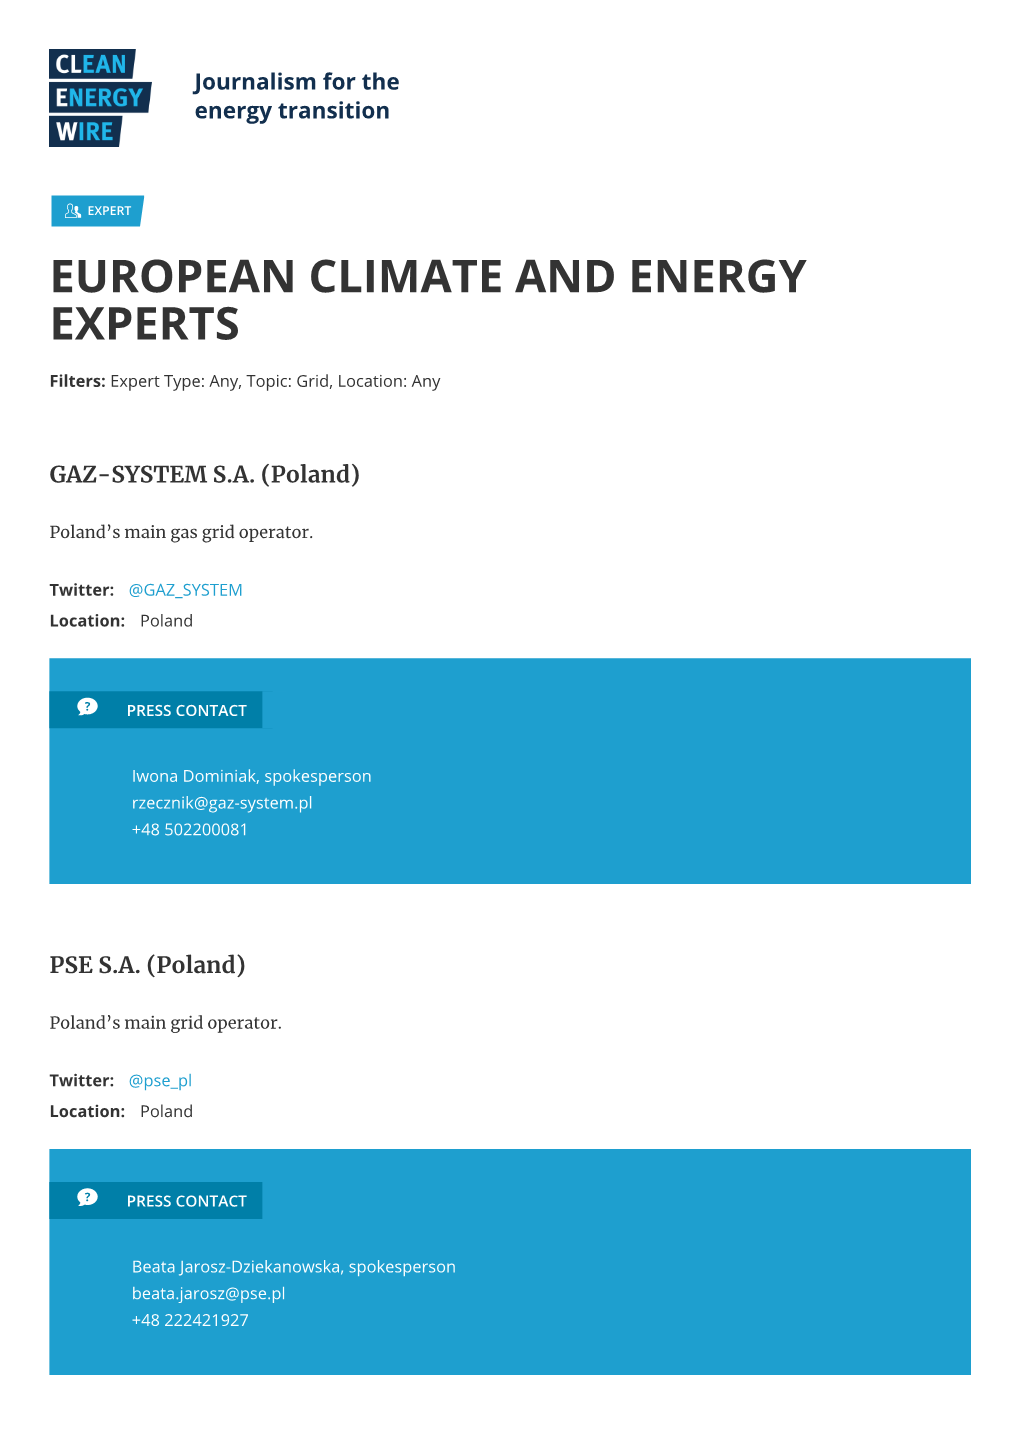 European Climate and Energy Experts